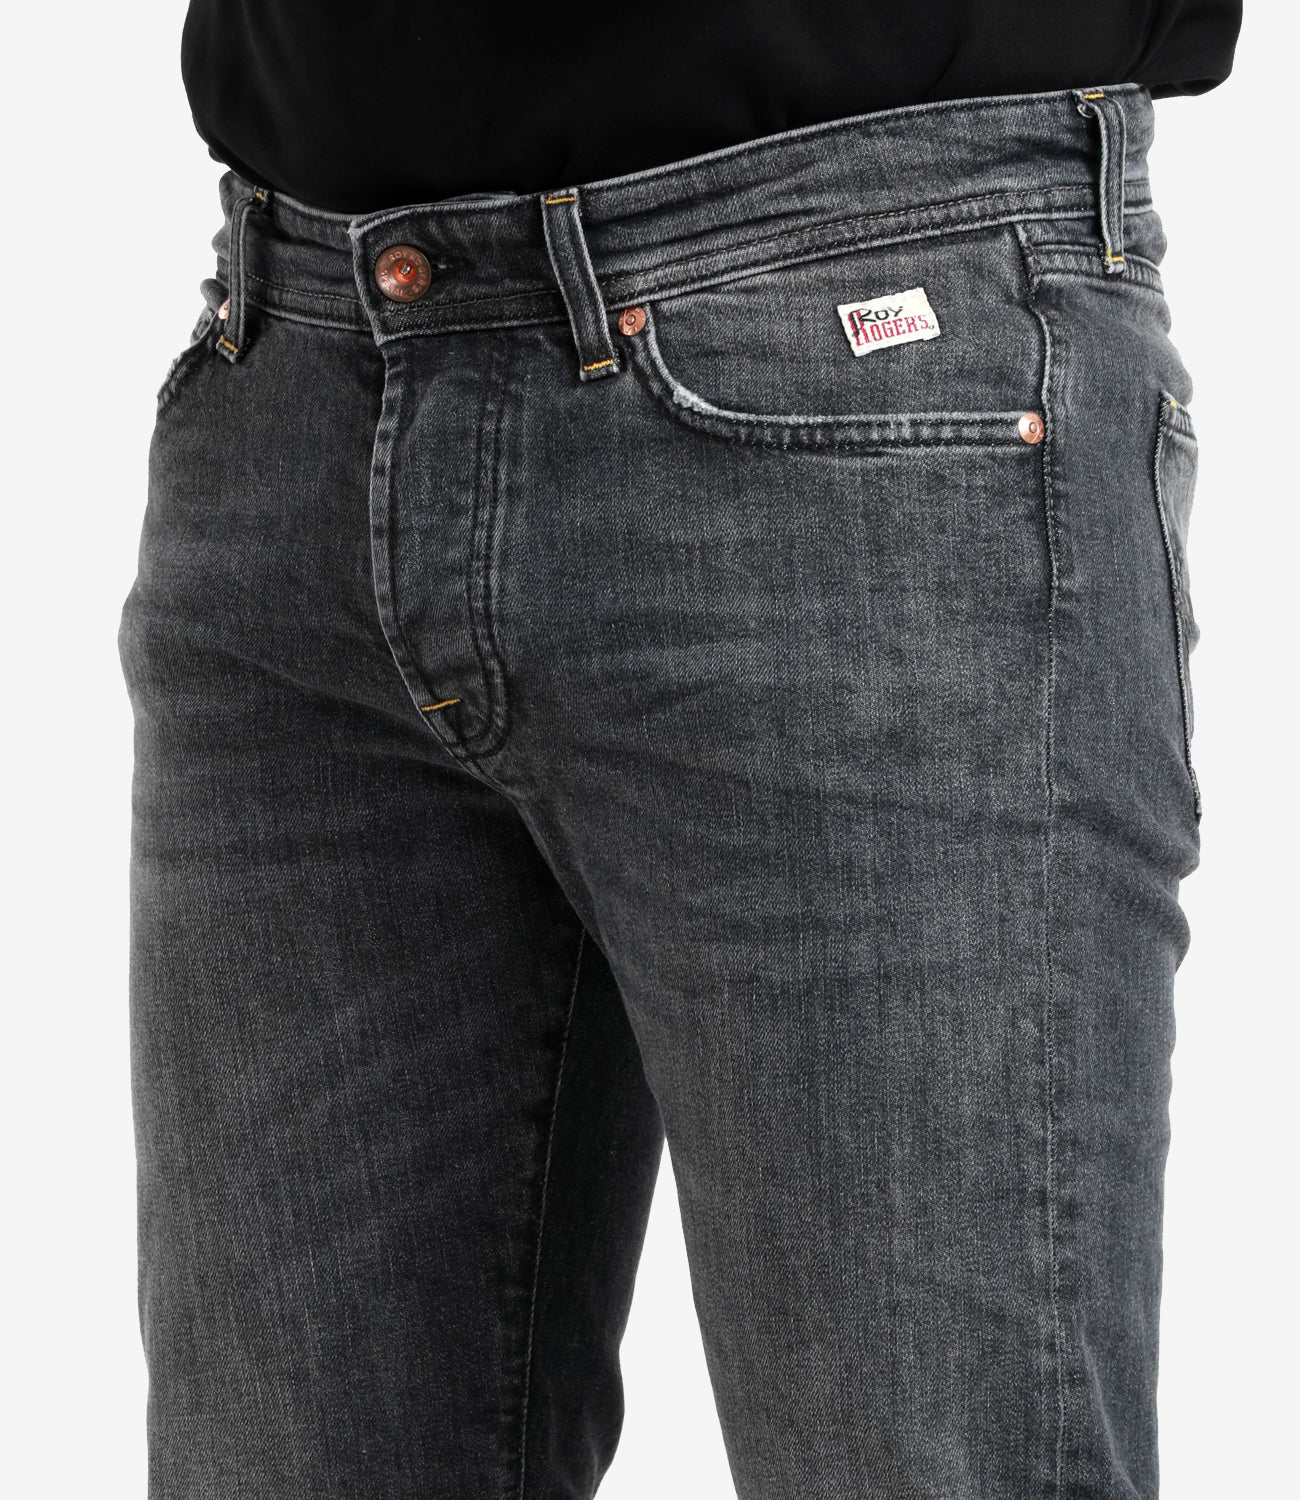 Roy Roger's | Jeans New 529 Superior